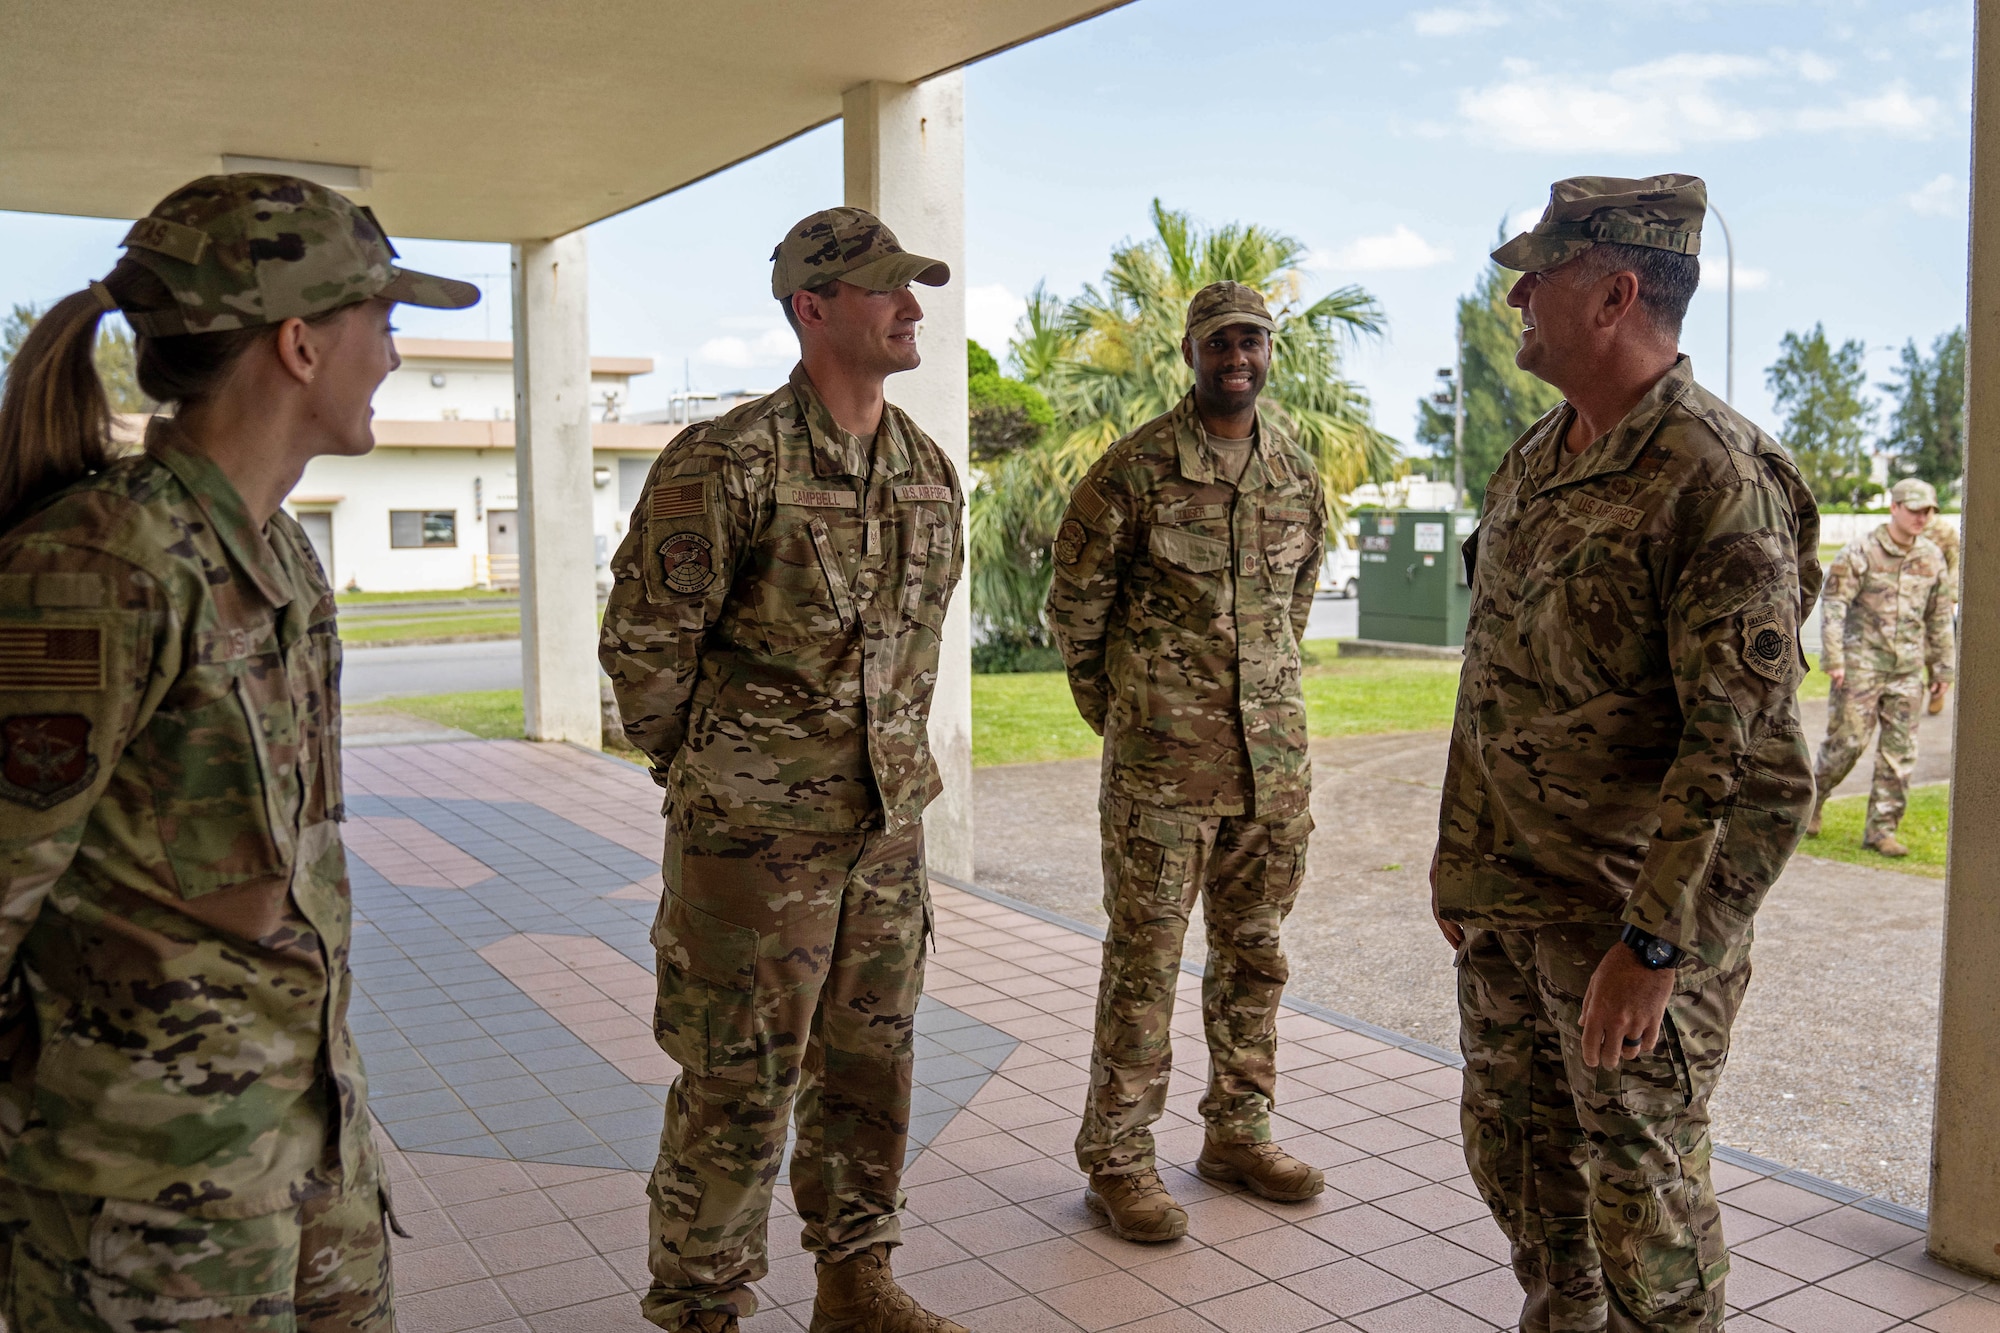 Maj. Gen. Eric Hill, Air Force Special Operations Command deputy commander, right, speaks with airmen from the 353rd Special Operations Wing while at Kadena Air Base, Japan, April 6, 2022. Hill discussed the evolving roles that Special Operations Forces must adapt to fulfill across the Indo-Pacific, emphasizing the need for multifunctional Airmen and the importance for U.S. SOF to grow relationships with international allies and partners throughout the region. (U.S. Air Force photo by Capt. Joshua Thompson)